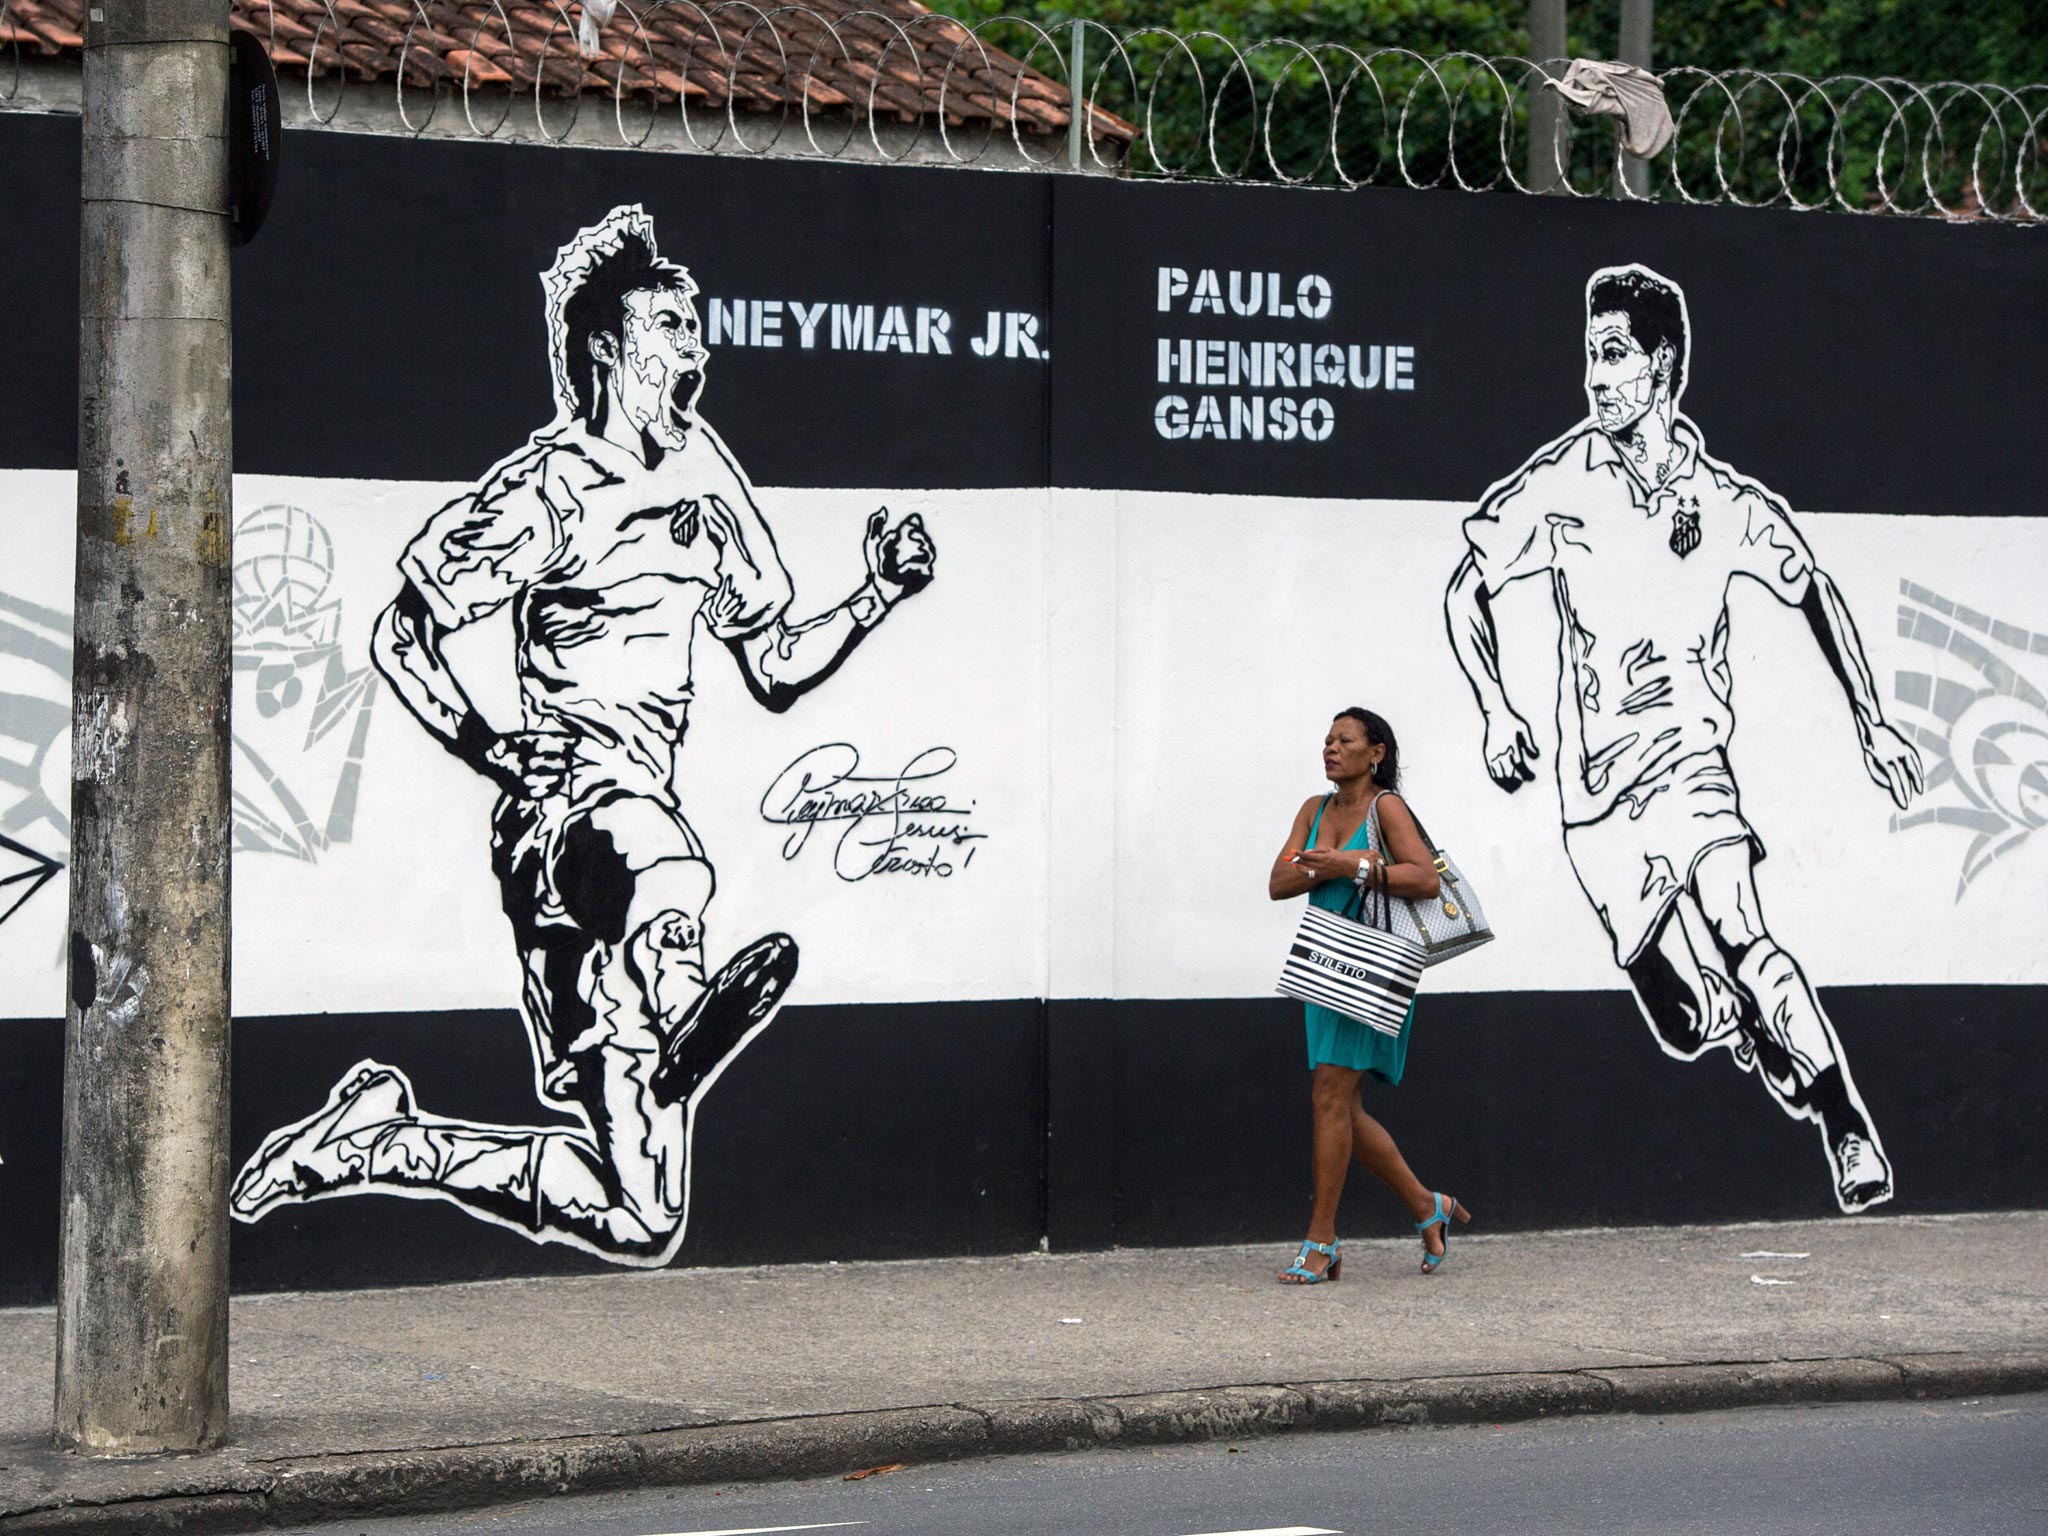 A mural depicting Neymar at the Santos training ground
the young Brazilian star used to grace